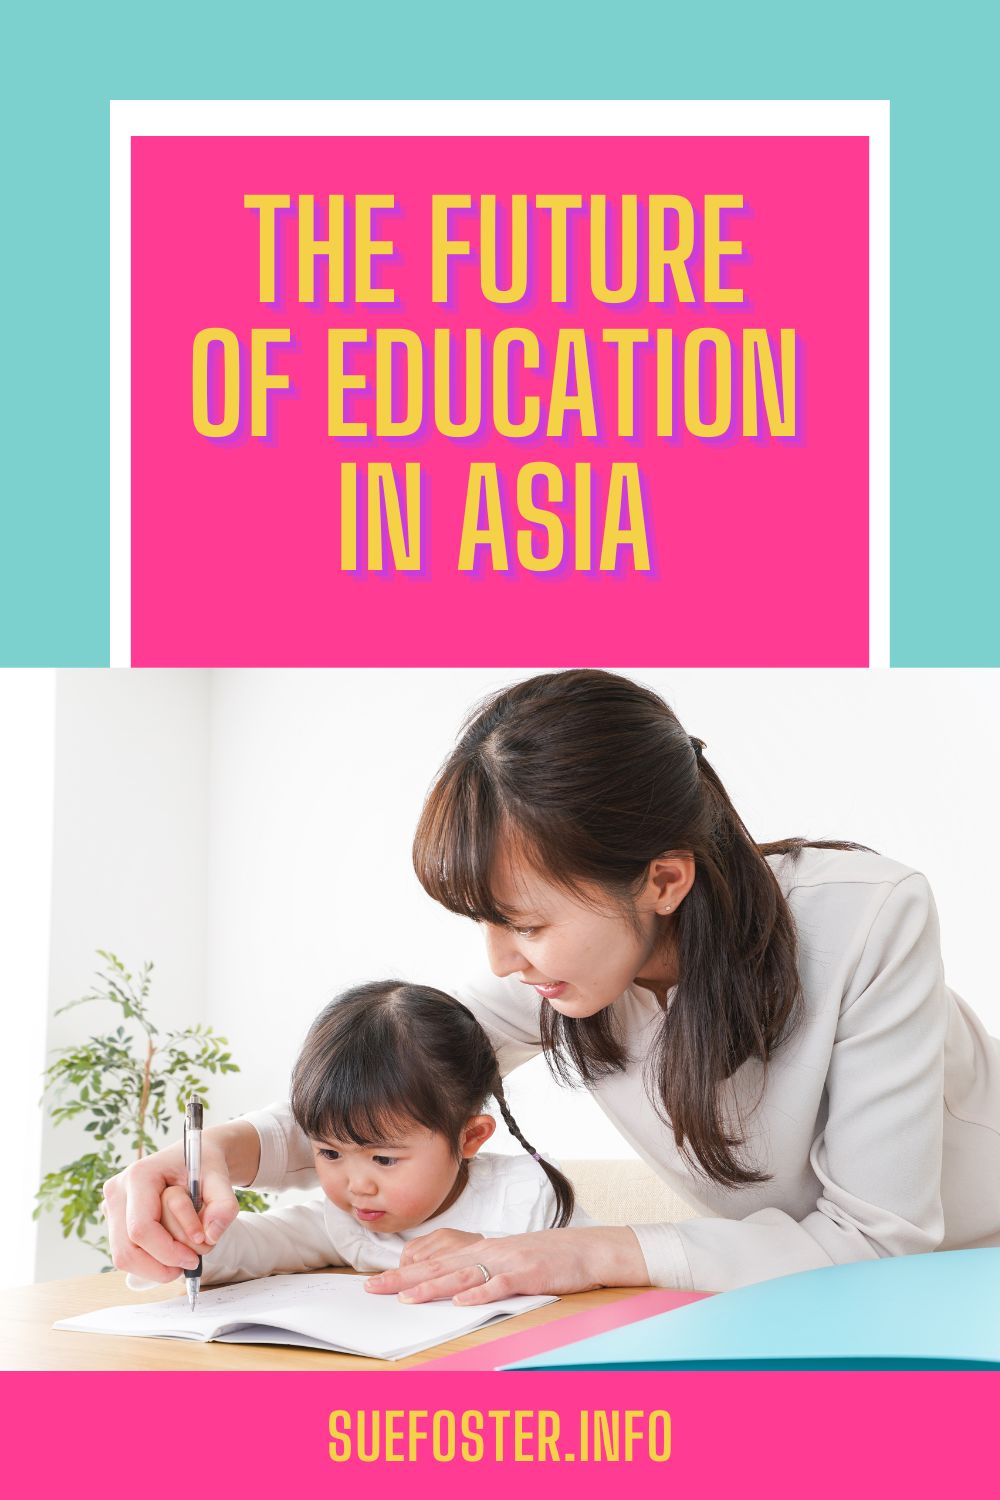 The Asian education system is at a crossroads. Traditional teaching methods are no longer as effective as they once were, and new ways of learning are emerging.